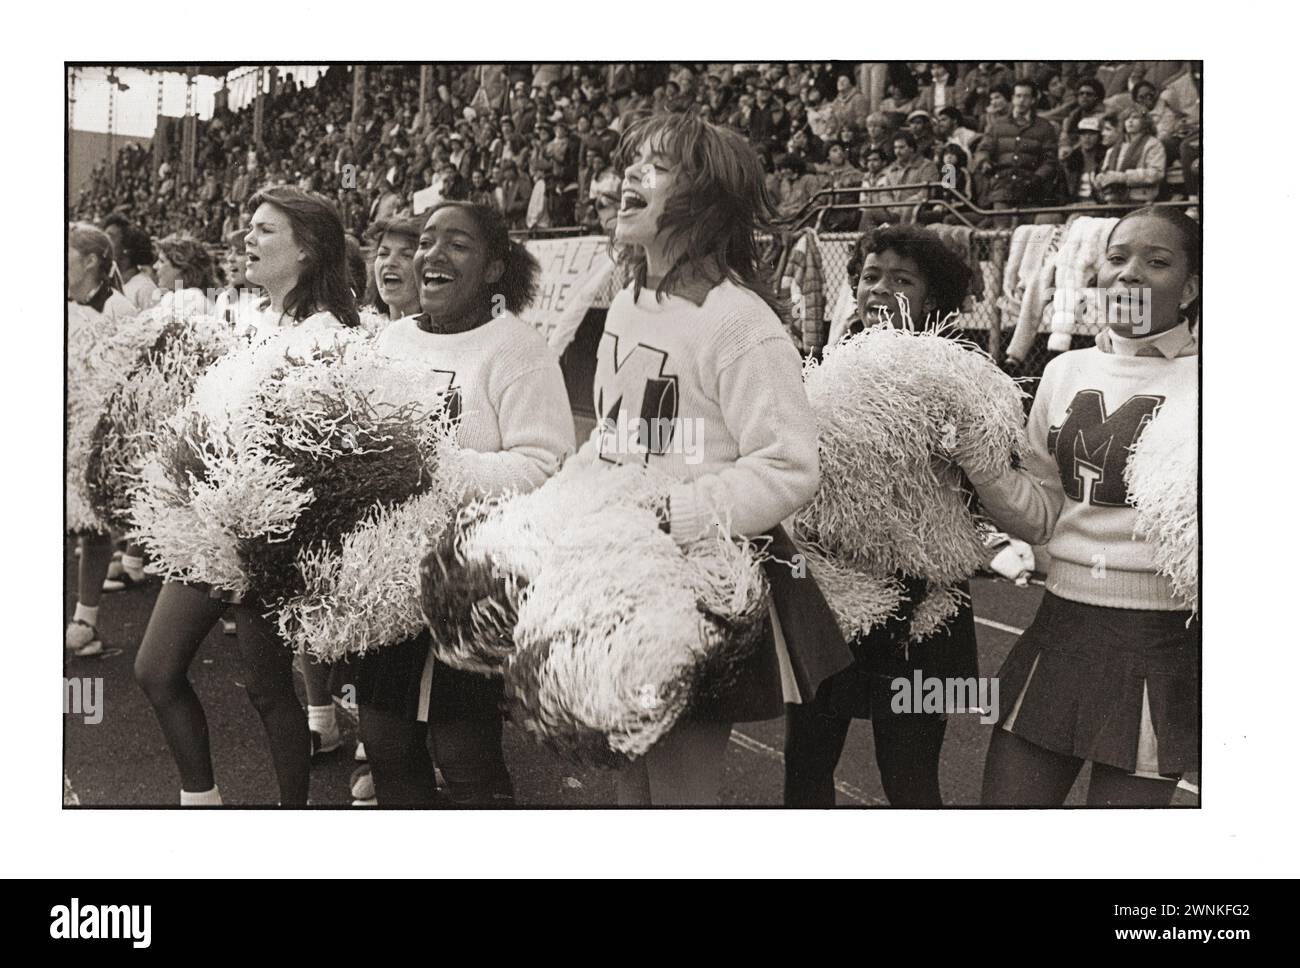 High school cheerleaders shake their pom poms at a game at Midwood Field in Brooklyn, New York. Not certain but I think these girls are from Midwood High. Stock Photo